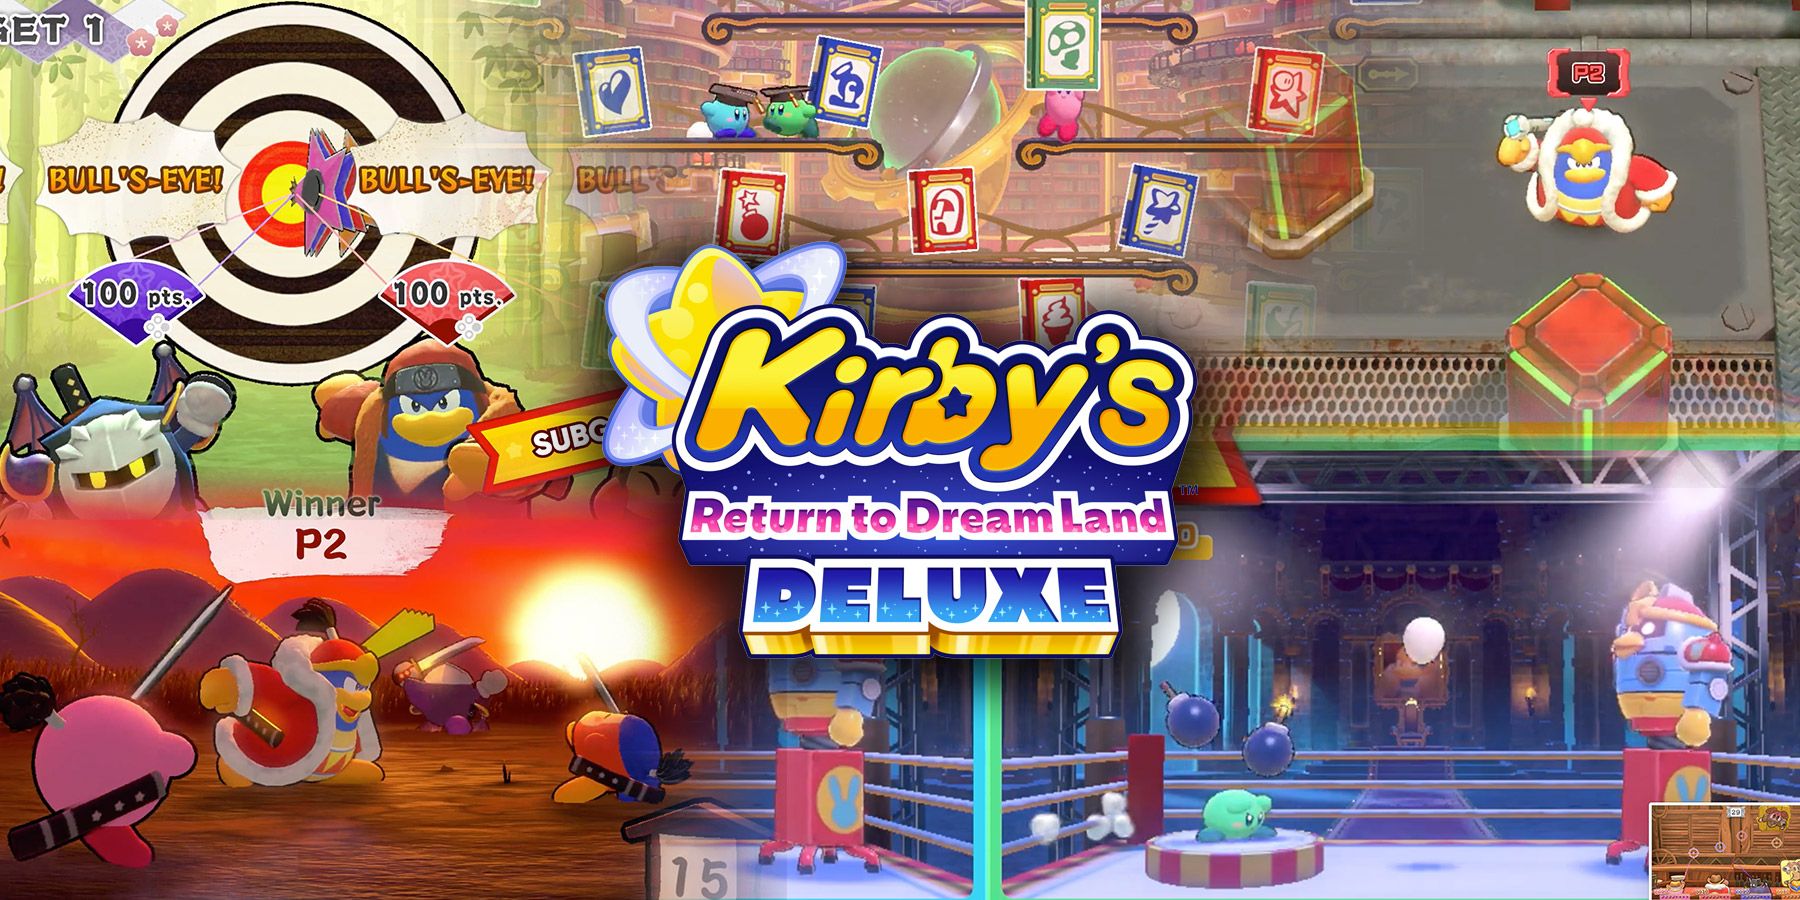 Kirby's Return to Dream Land Deluxe – 15 Details You Need To Know About